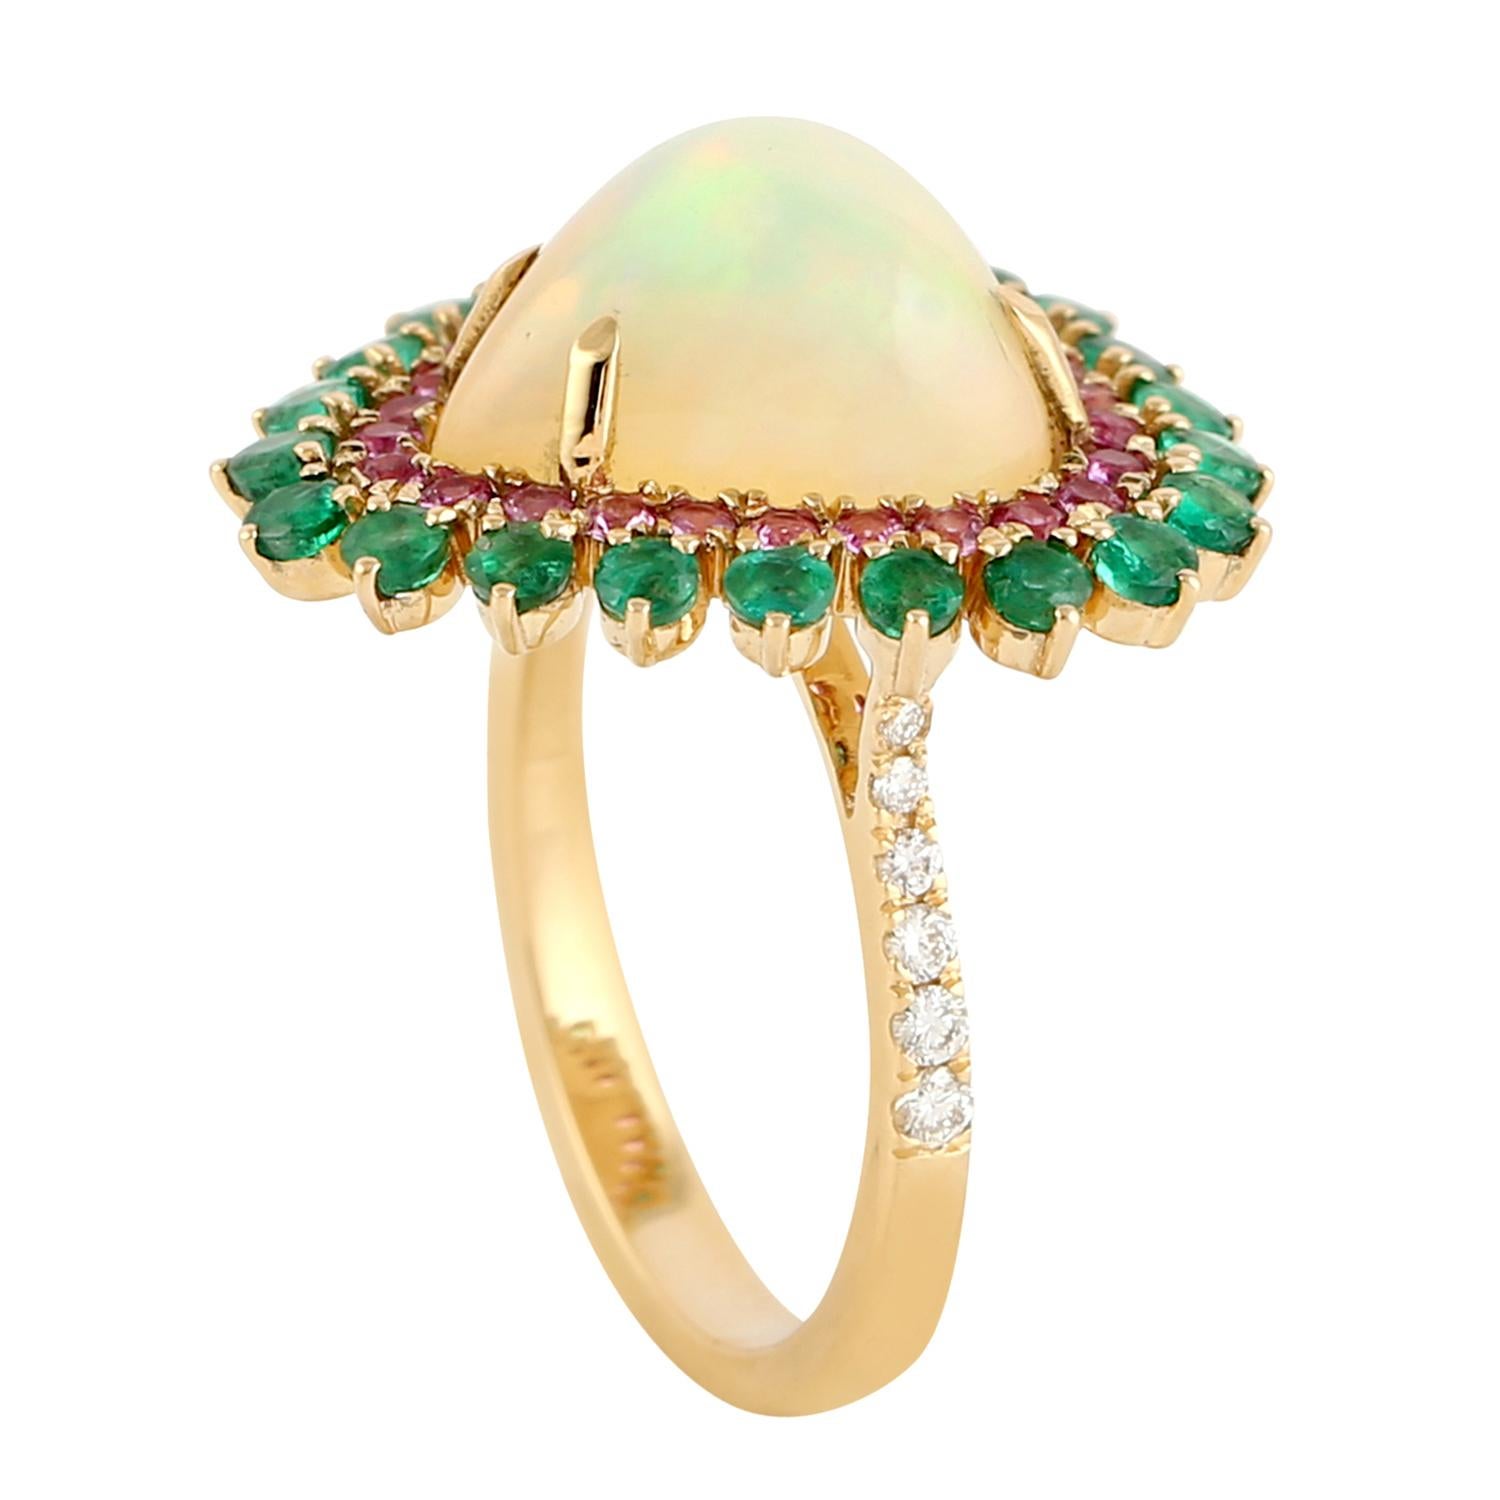 This ring has been meticulously crafted from 18-karat gold.  It is hand set with 4.62 carats opal, 1.09 carats emerald, .6 carats sapphire & .17 carats of sparkling diamonds. 

The ring is a size 7 and may be resized to larger or smaller upon